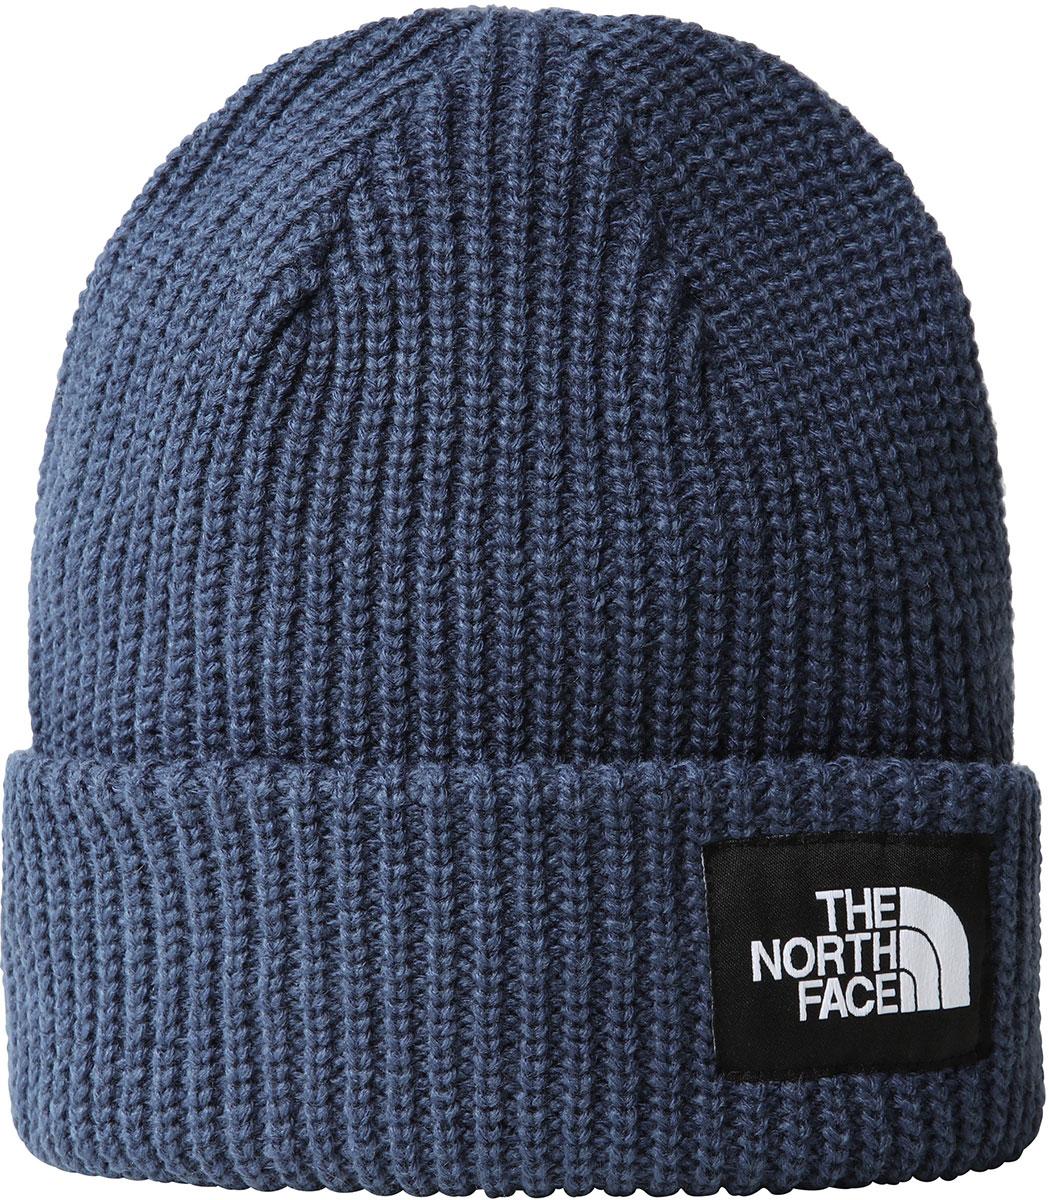 The North Face Salty Dog Lined Beanie - Shady Blue